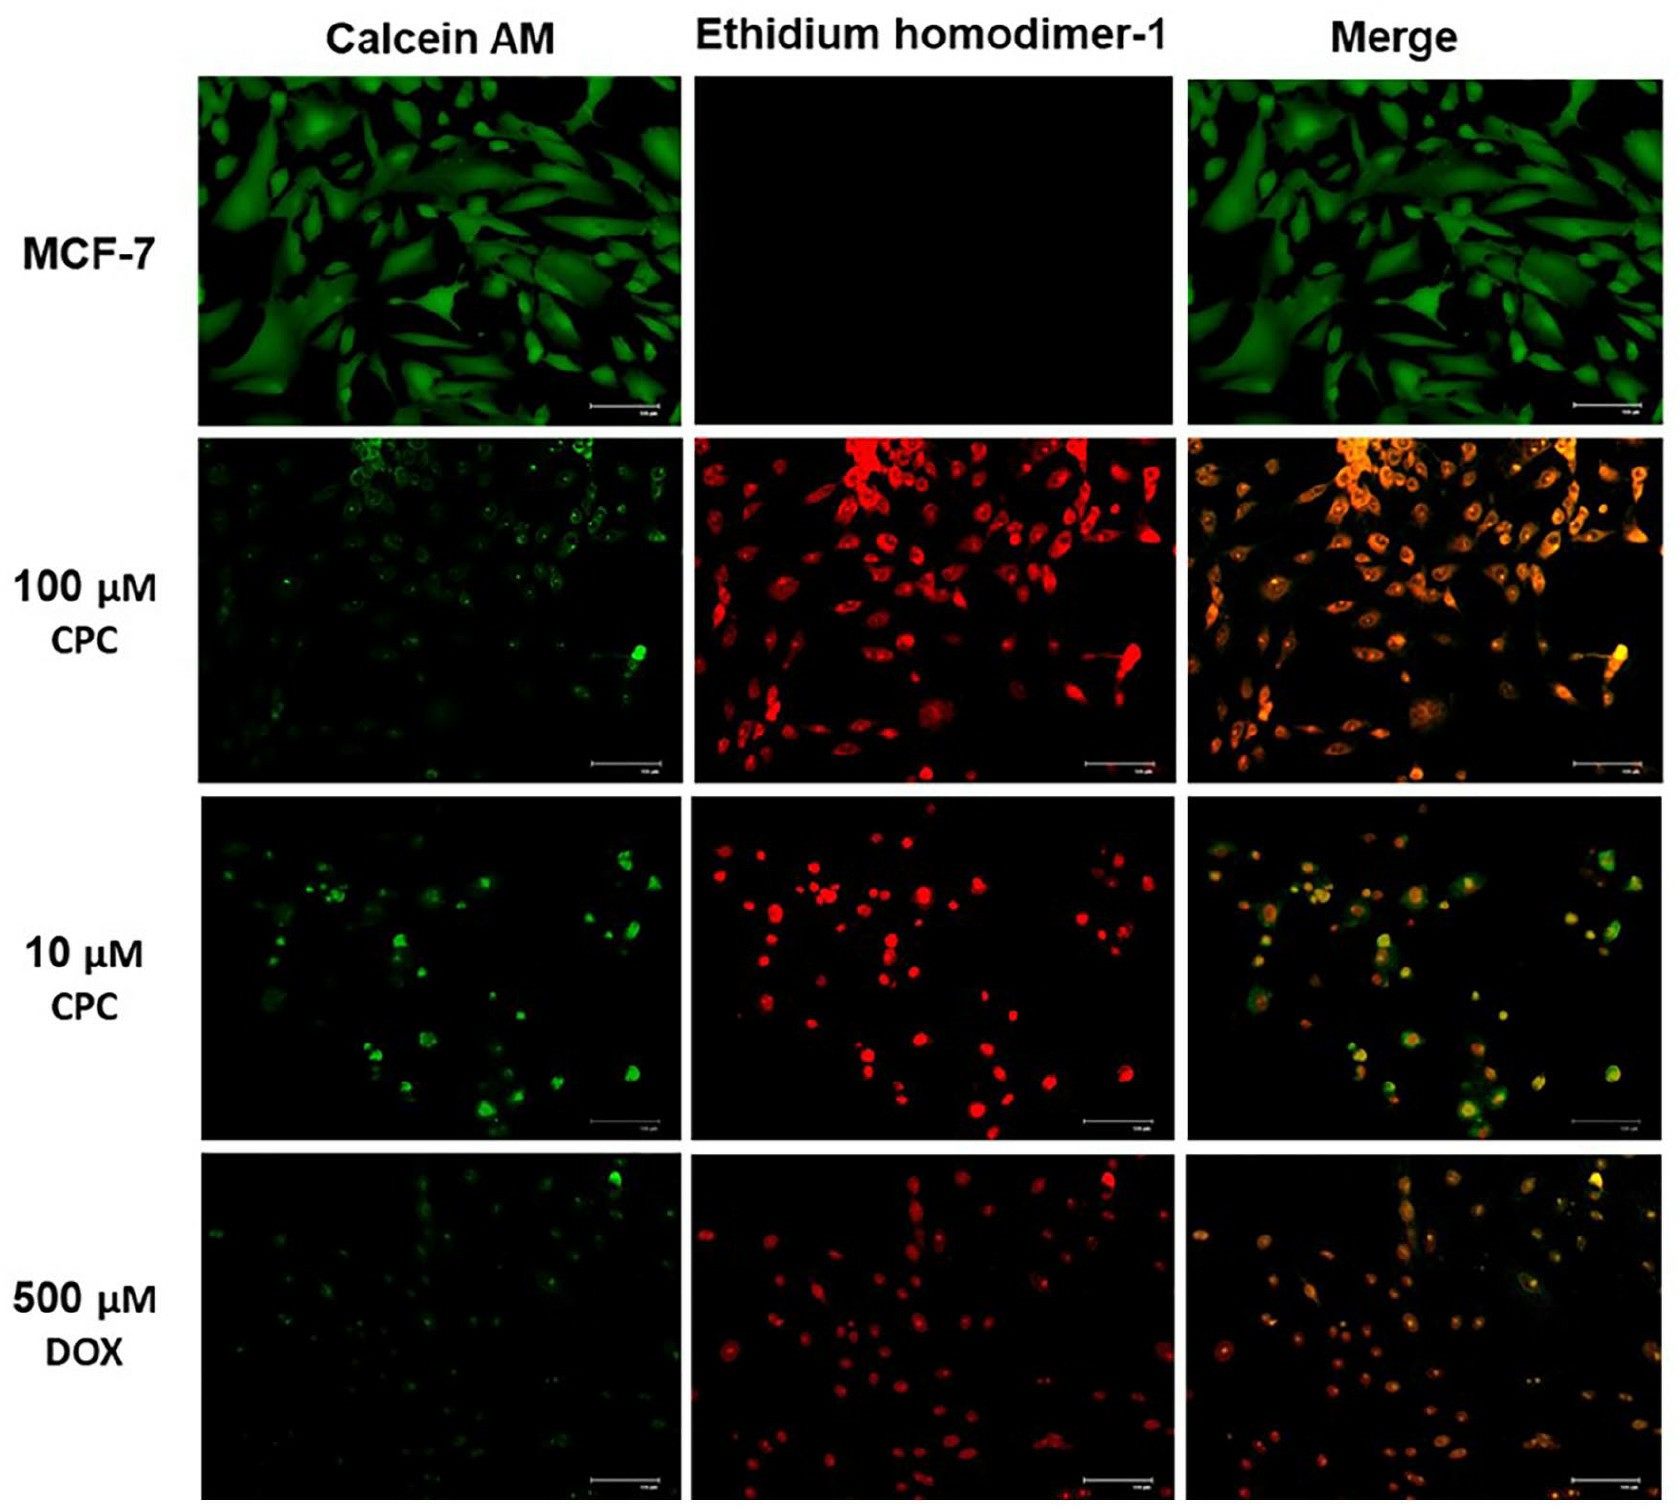 Cell survival and morphology of MCF-7 were determined by LIVE/DEAD test and FLM after a 24 h-exposition to 10 and 100 µM CPC or 500 µM DOX (inhibition control).